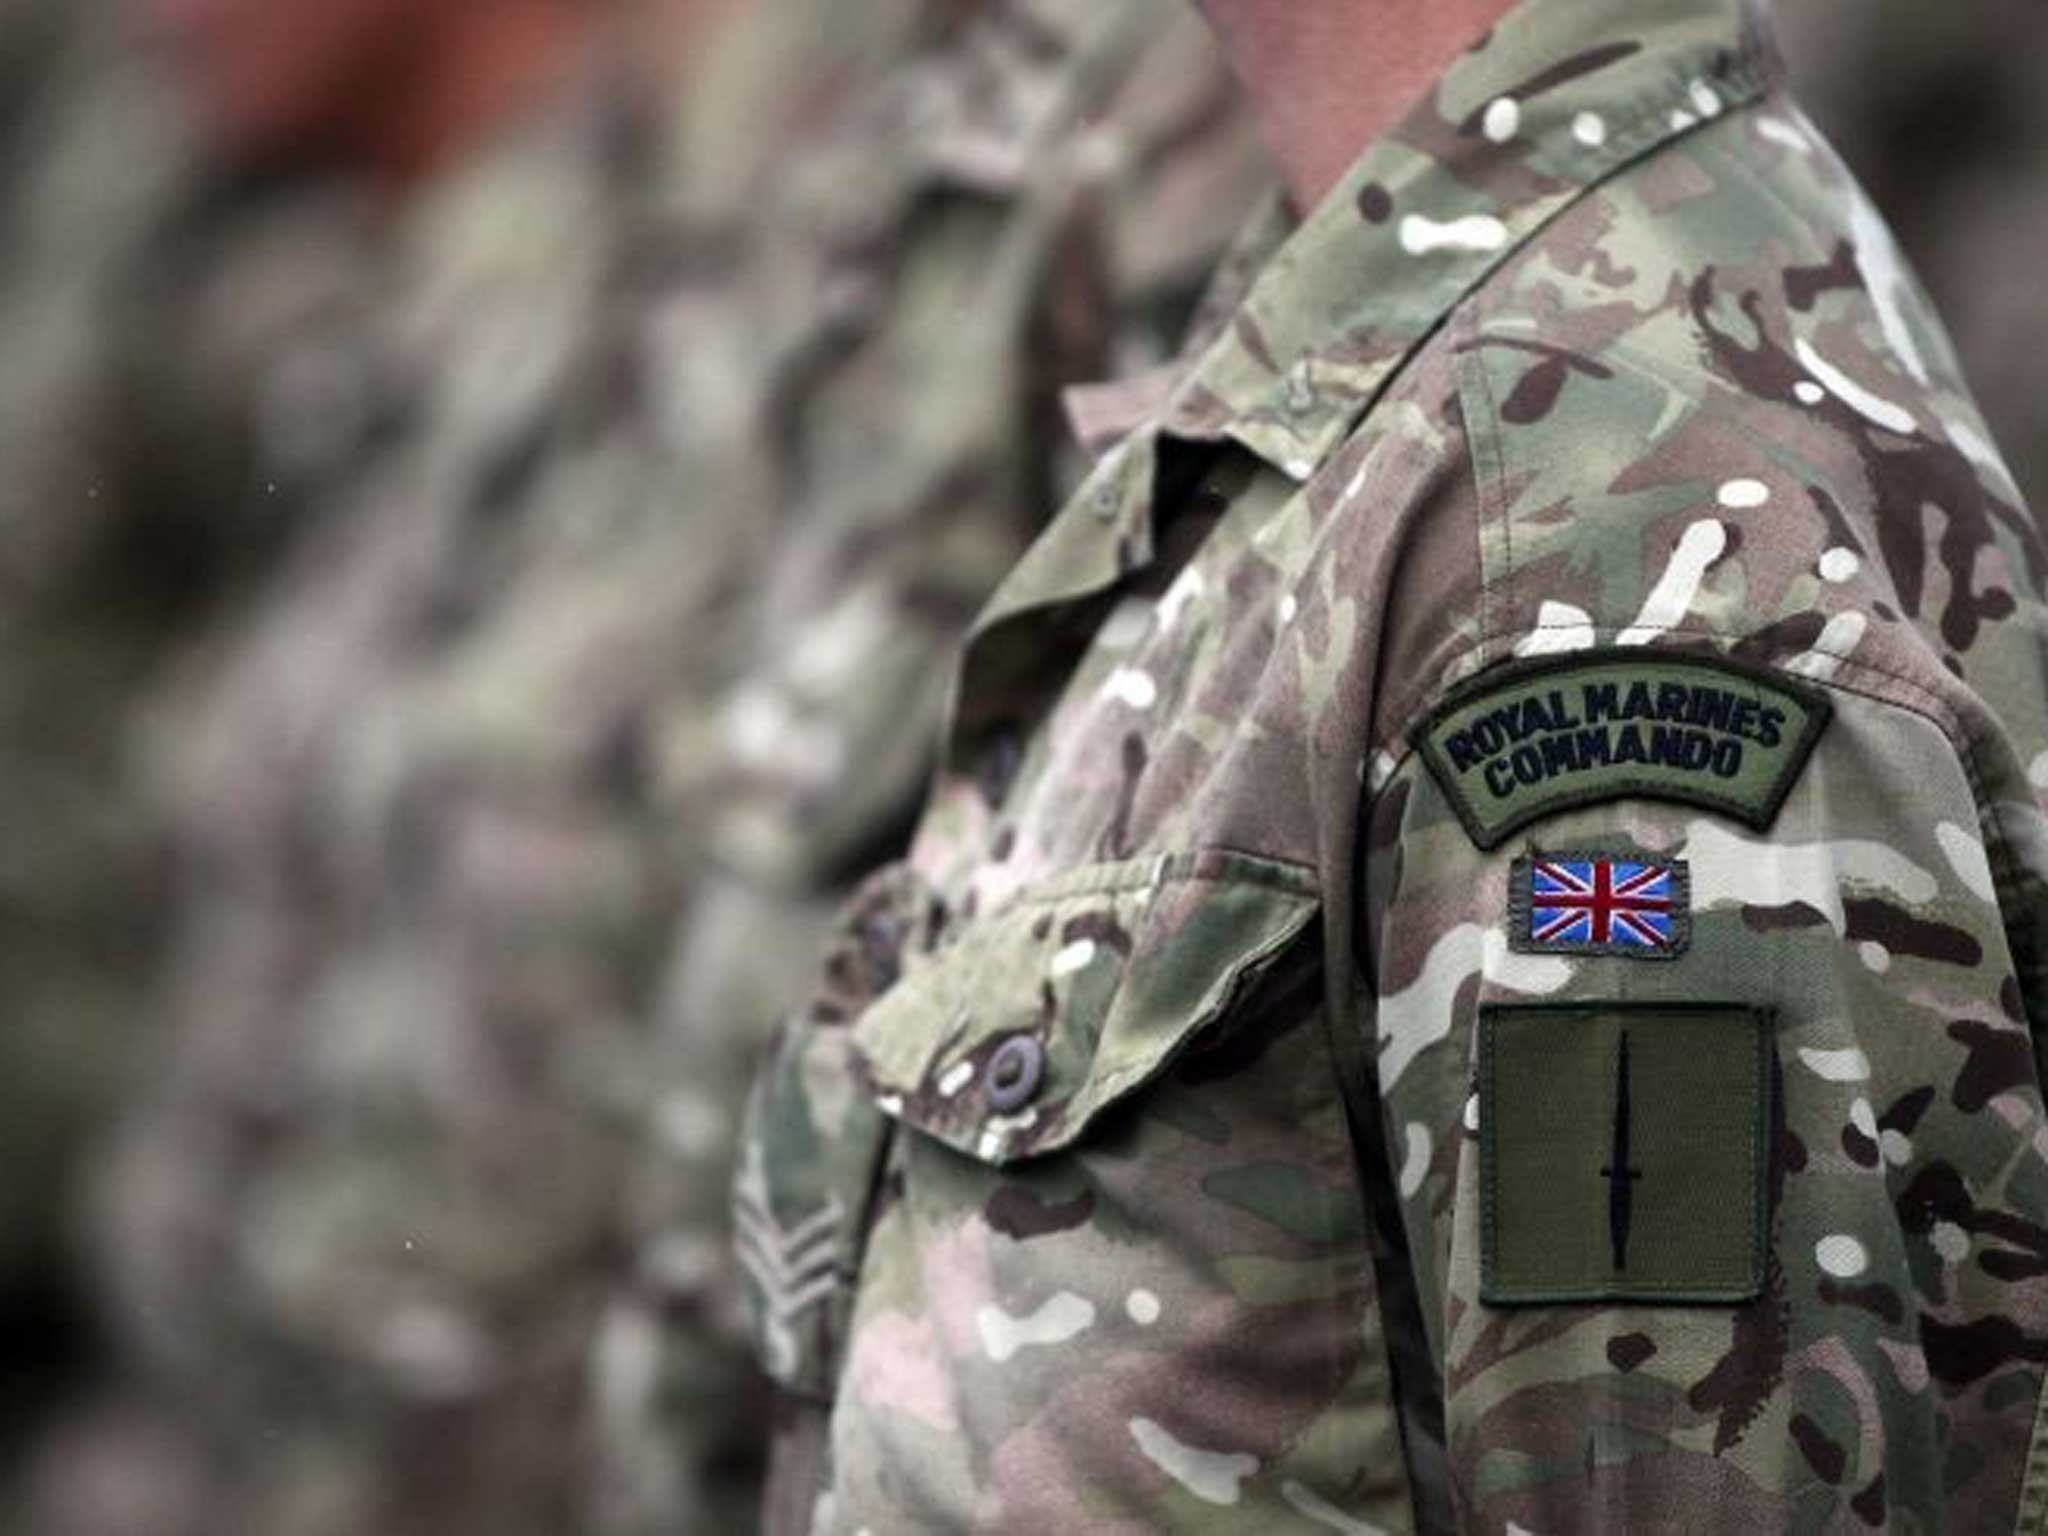 Closed ranks: A former Royal Marines officer has refused to condemn part of the ‘family’